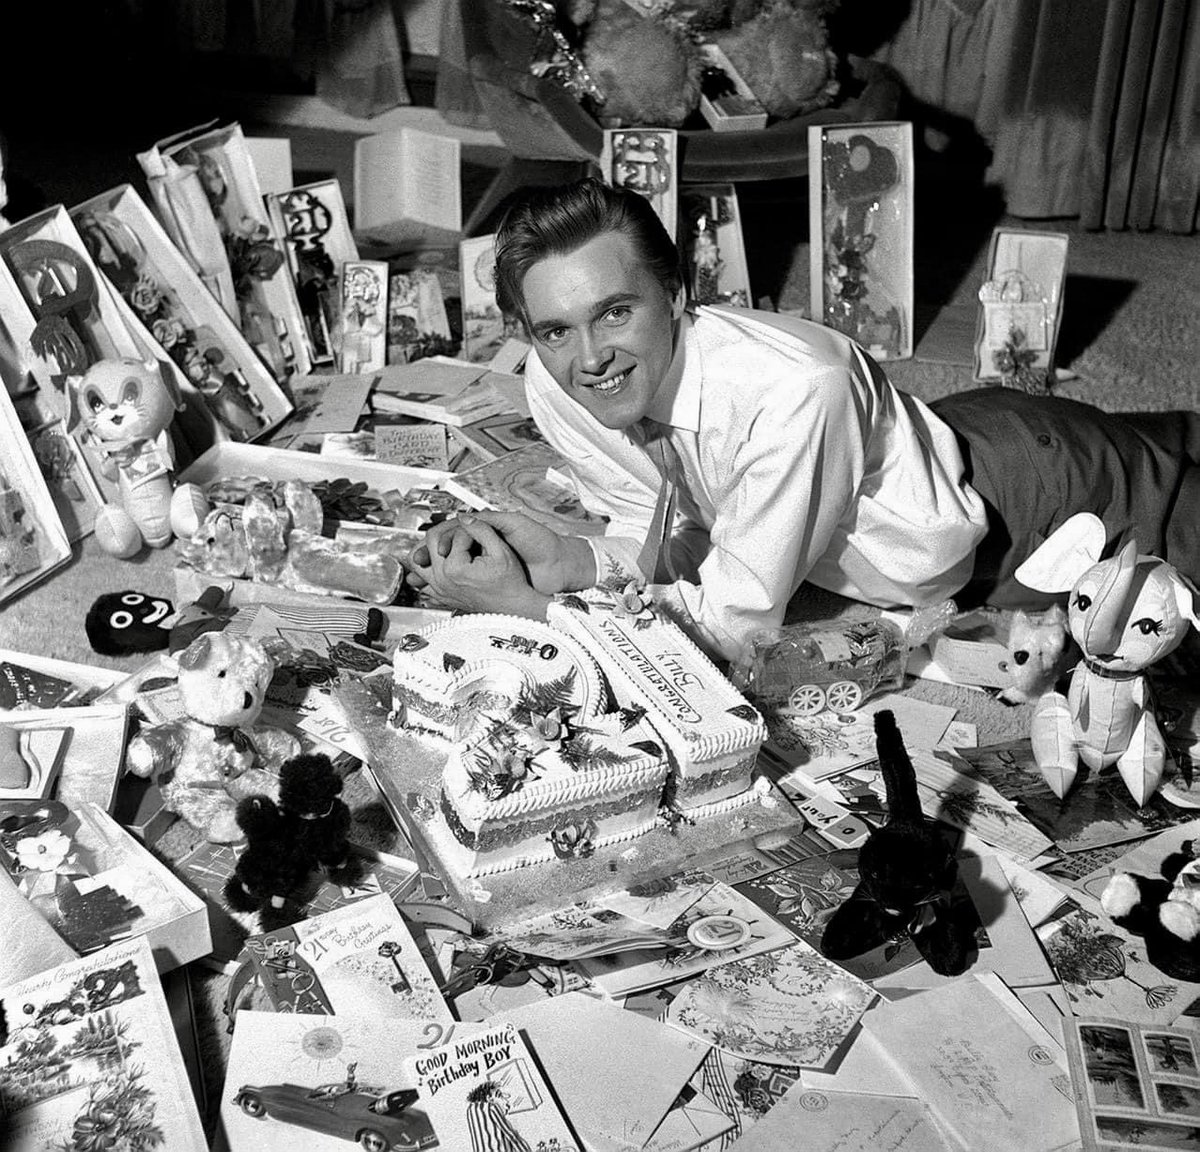 A special day today, as we celebrate what would’ve been Billy’s 84th birthday. 
Pictured here with gifts sent by fans for his 21st birthday. 
Always in our hearts. Happy Birthday, Billy!
#billyfury